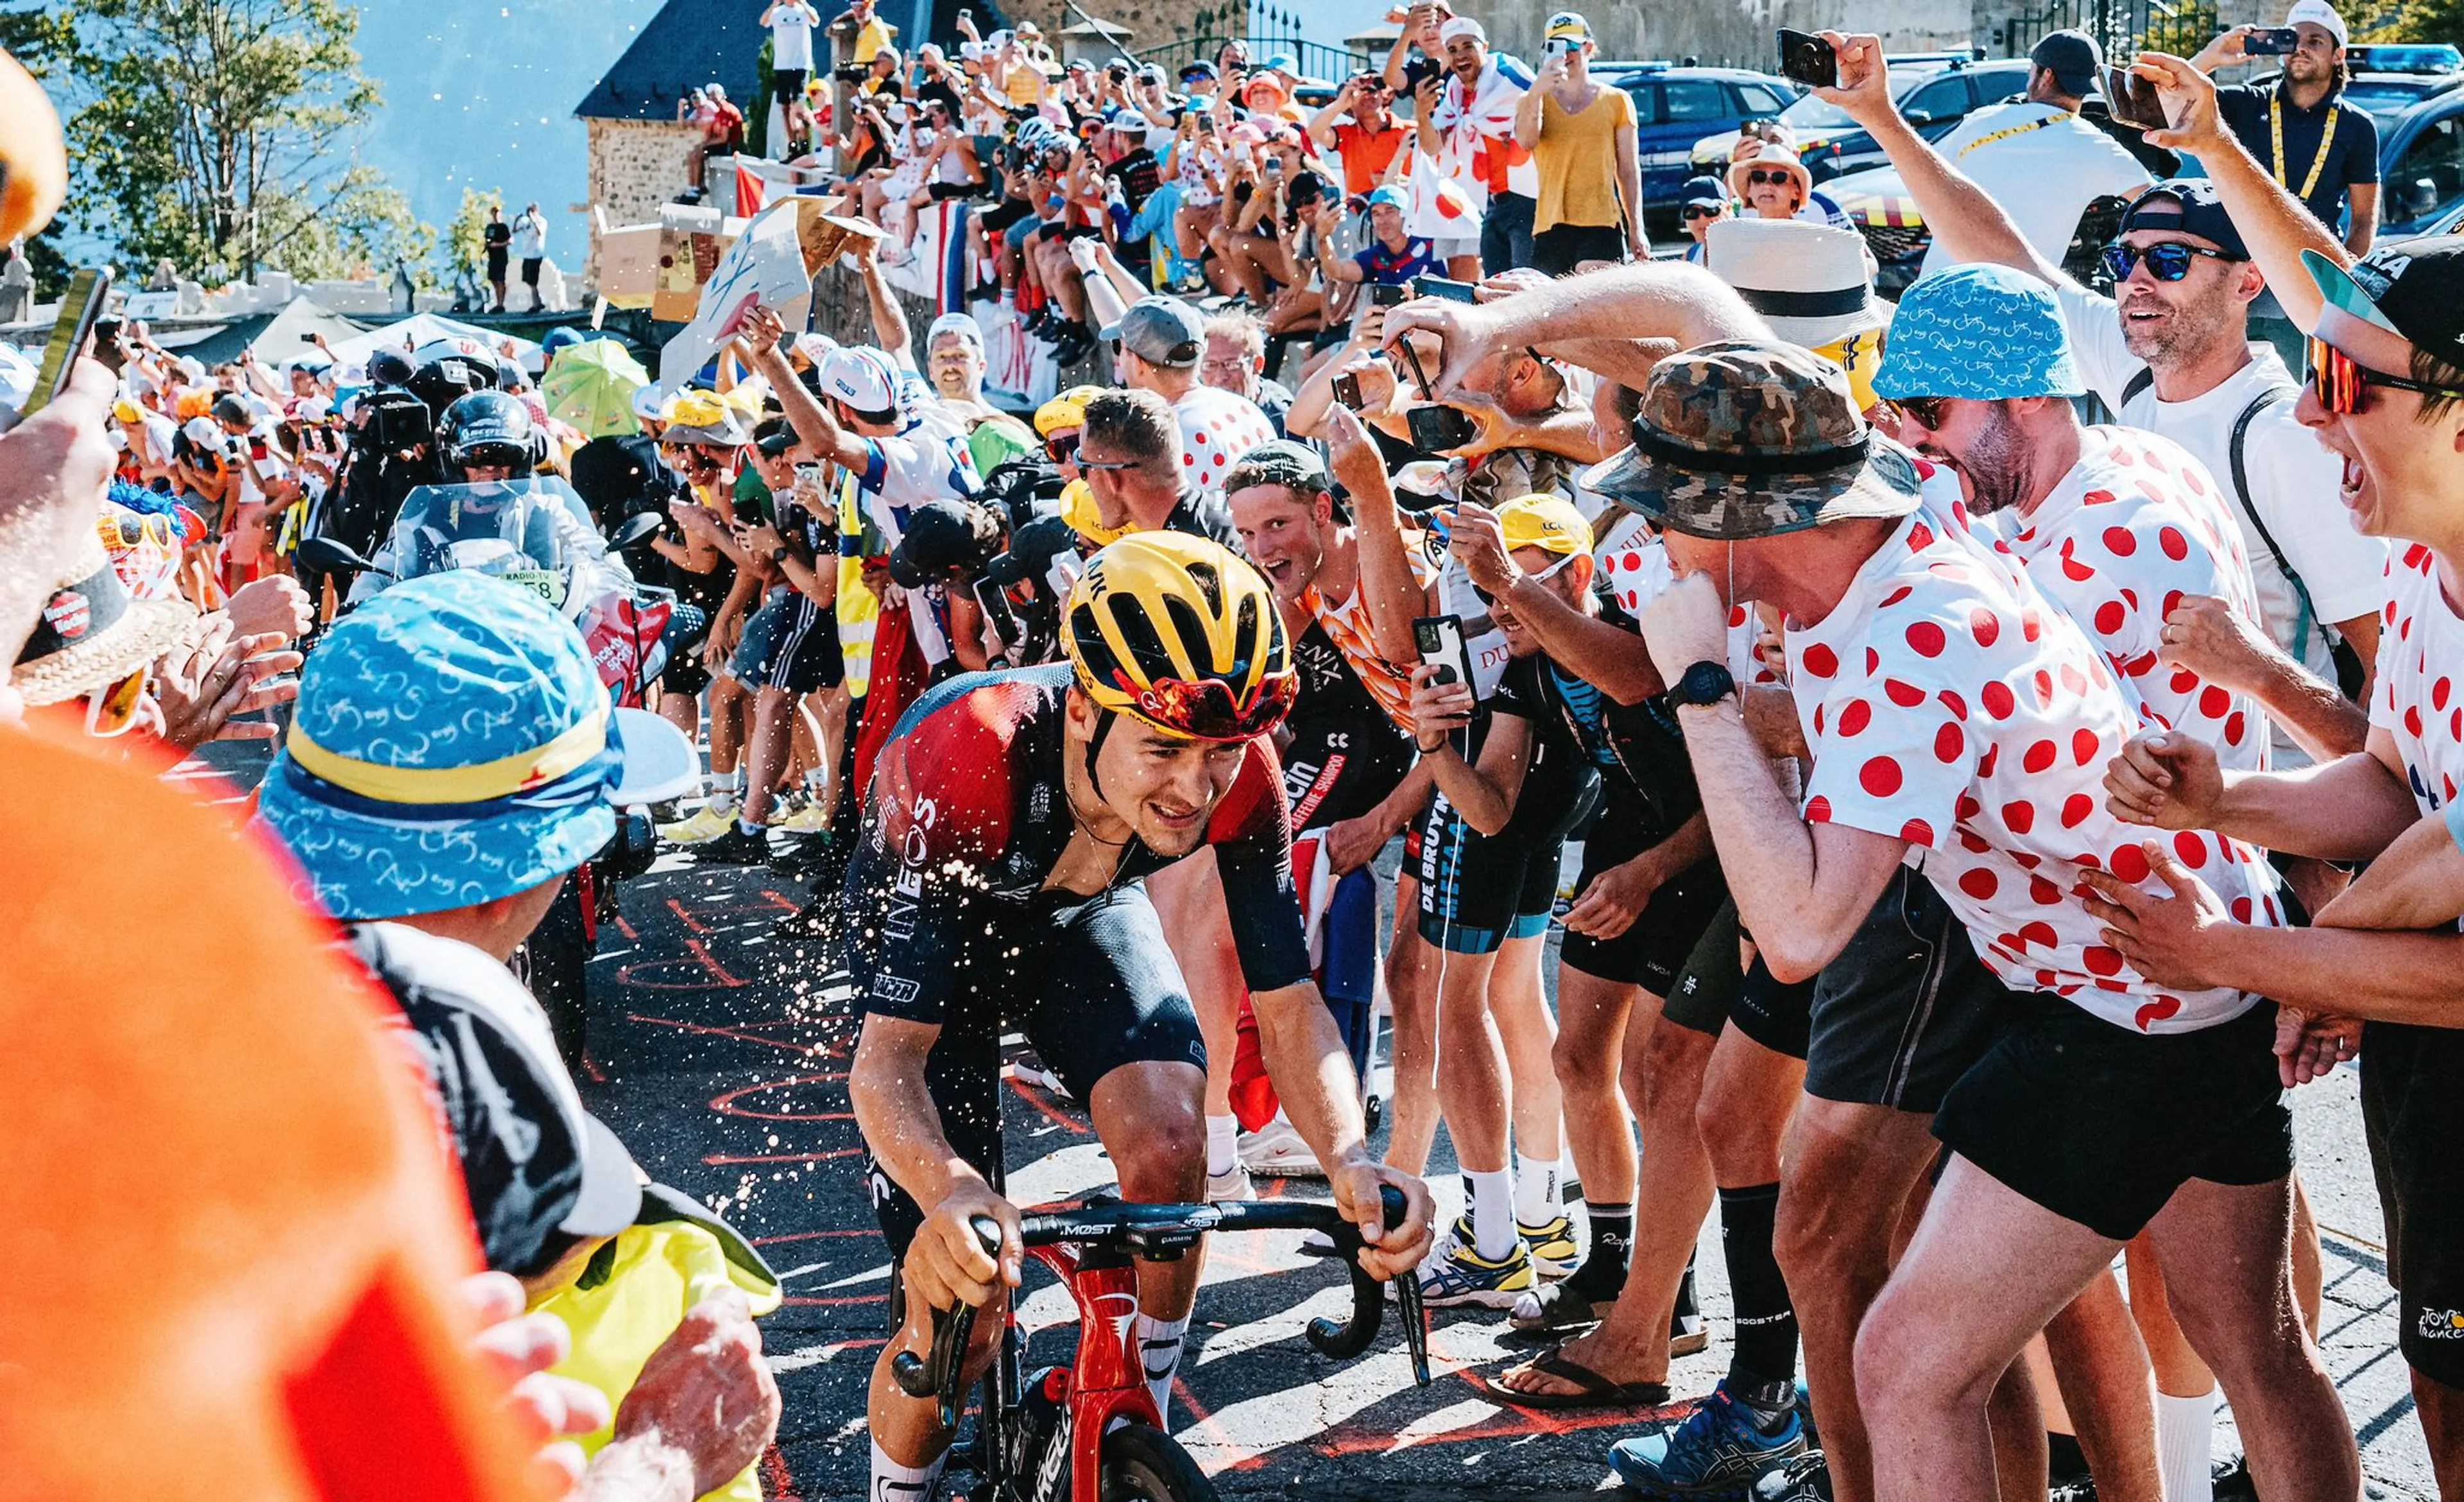 Tom Pidcock (Ineos Grenadiers) gets splashed by a fan during his ascent of Alpe d’Huez. He’d go on to win Stage 12 at the top of the legendary climb.